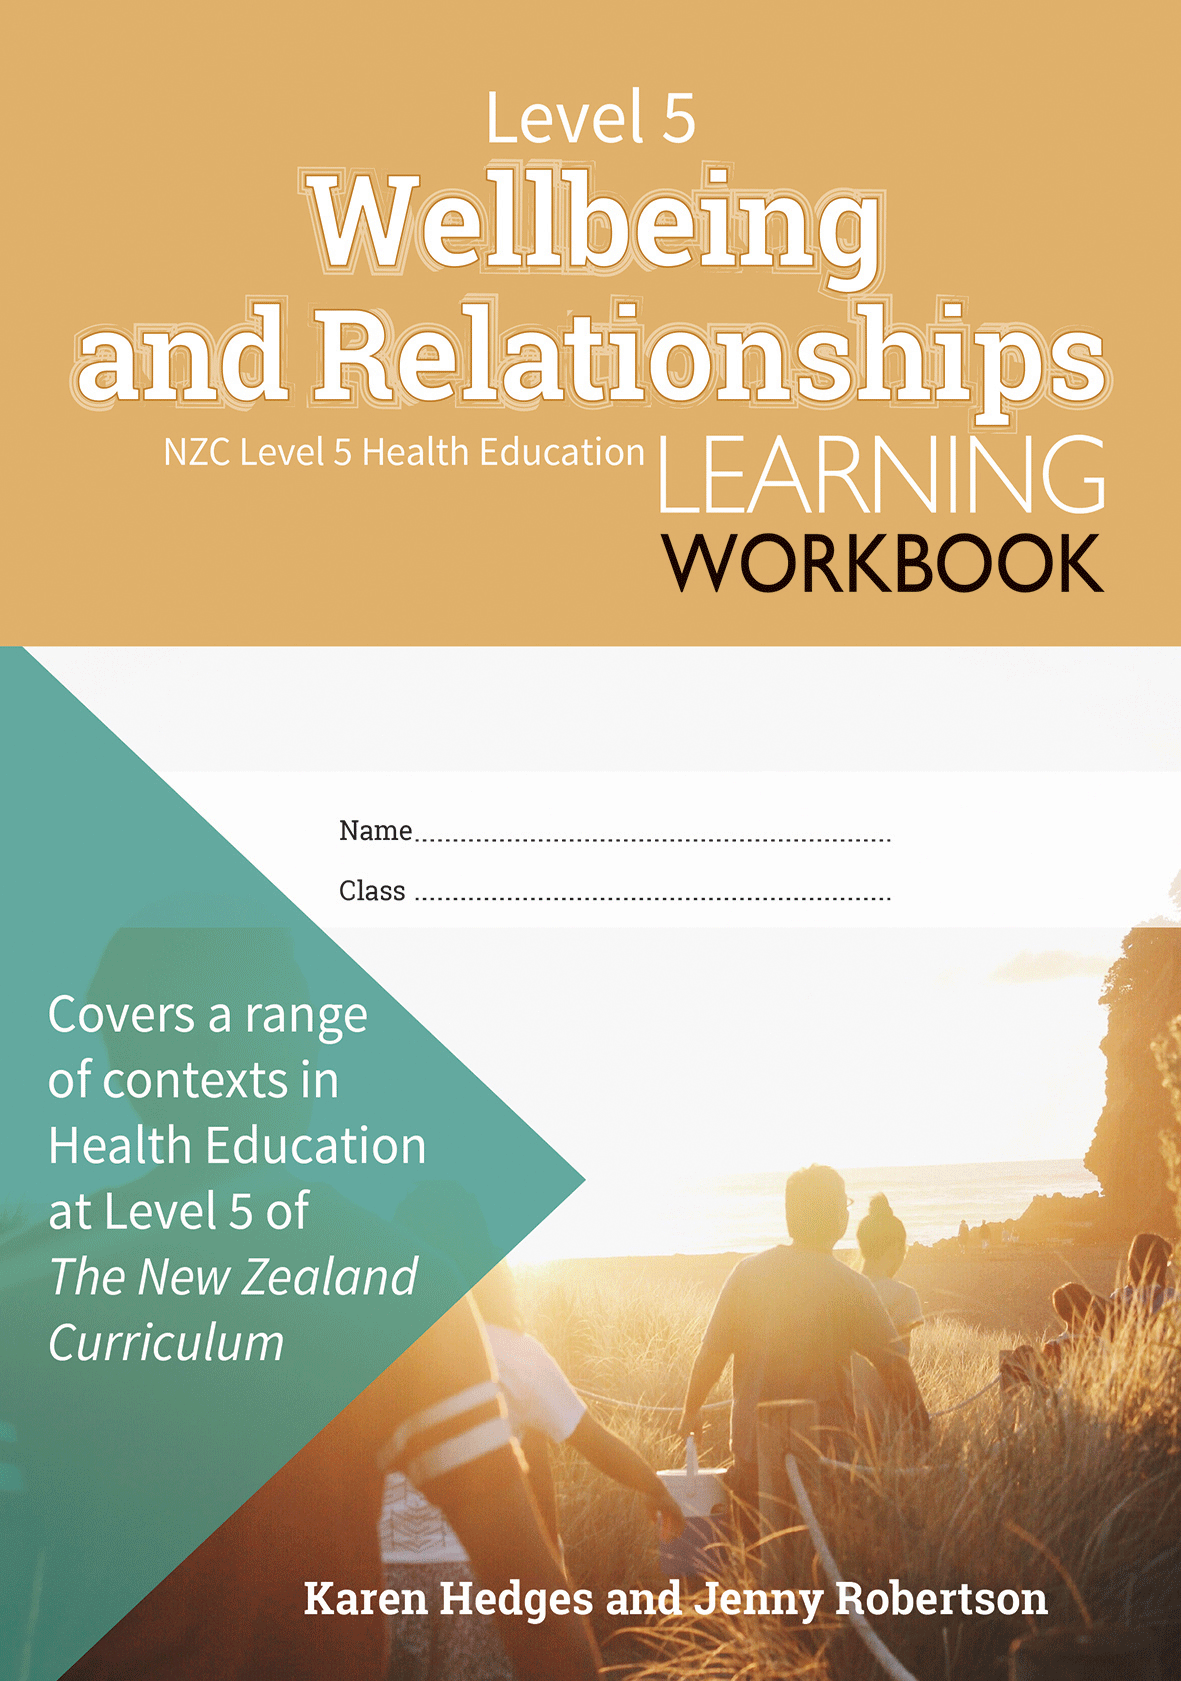 Level 5 Wellbeing and Relationships Learning Workbook